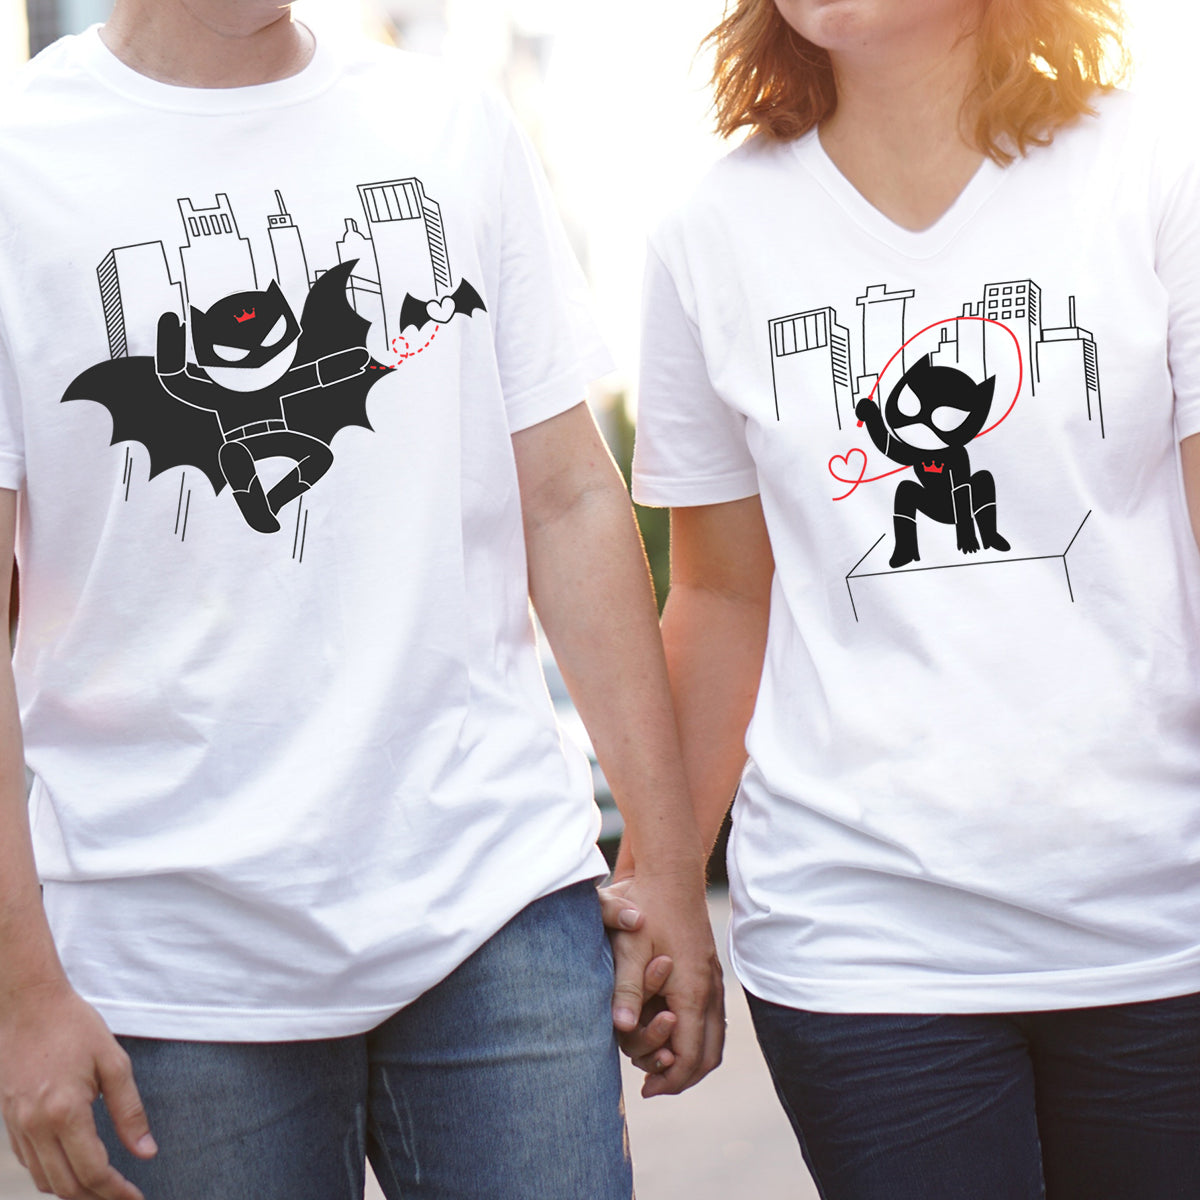 BoldLoft Love A Lot Gift Collection, from Superhero Couple Shirts to Movie Characters Gifts for Couples